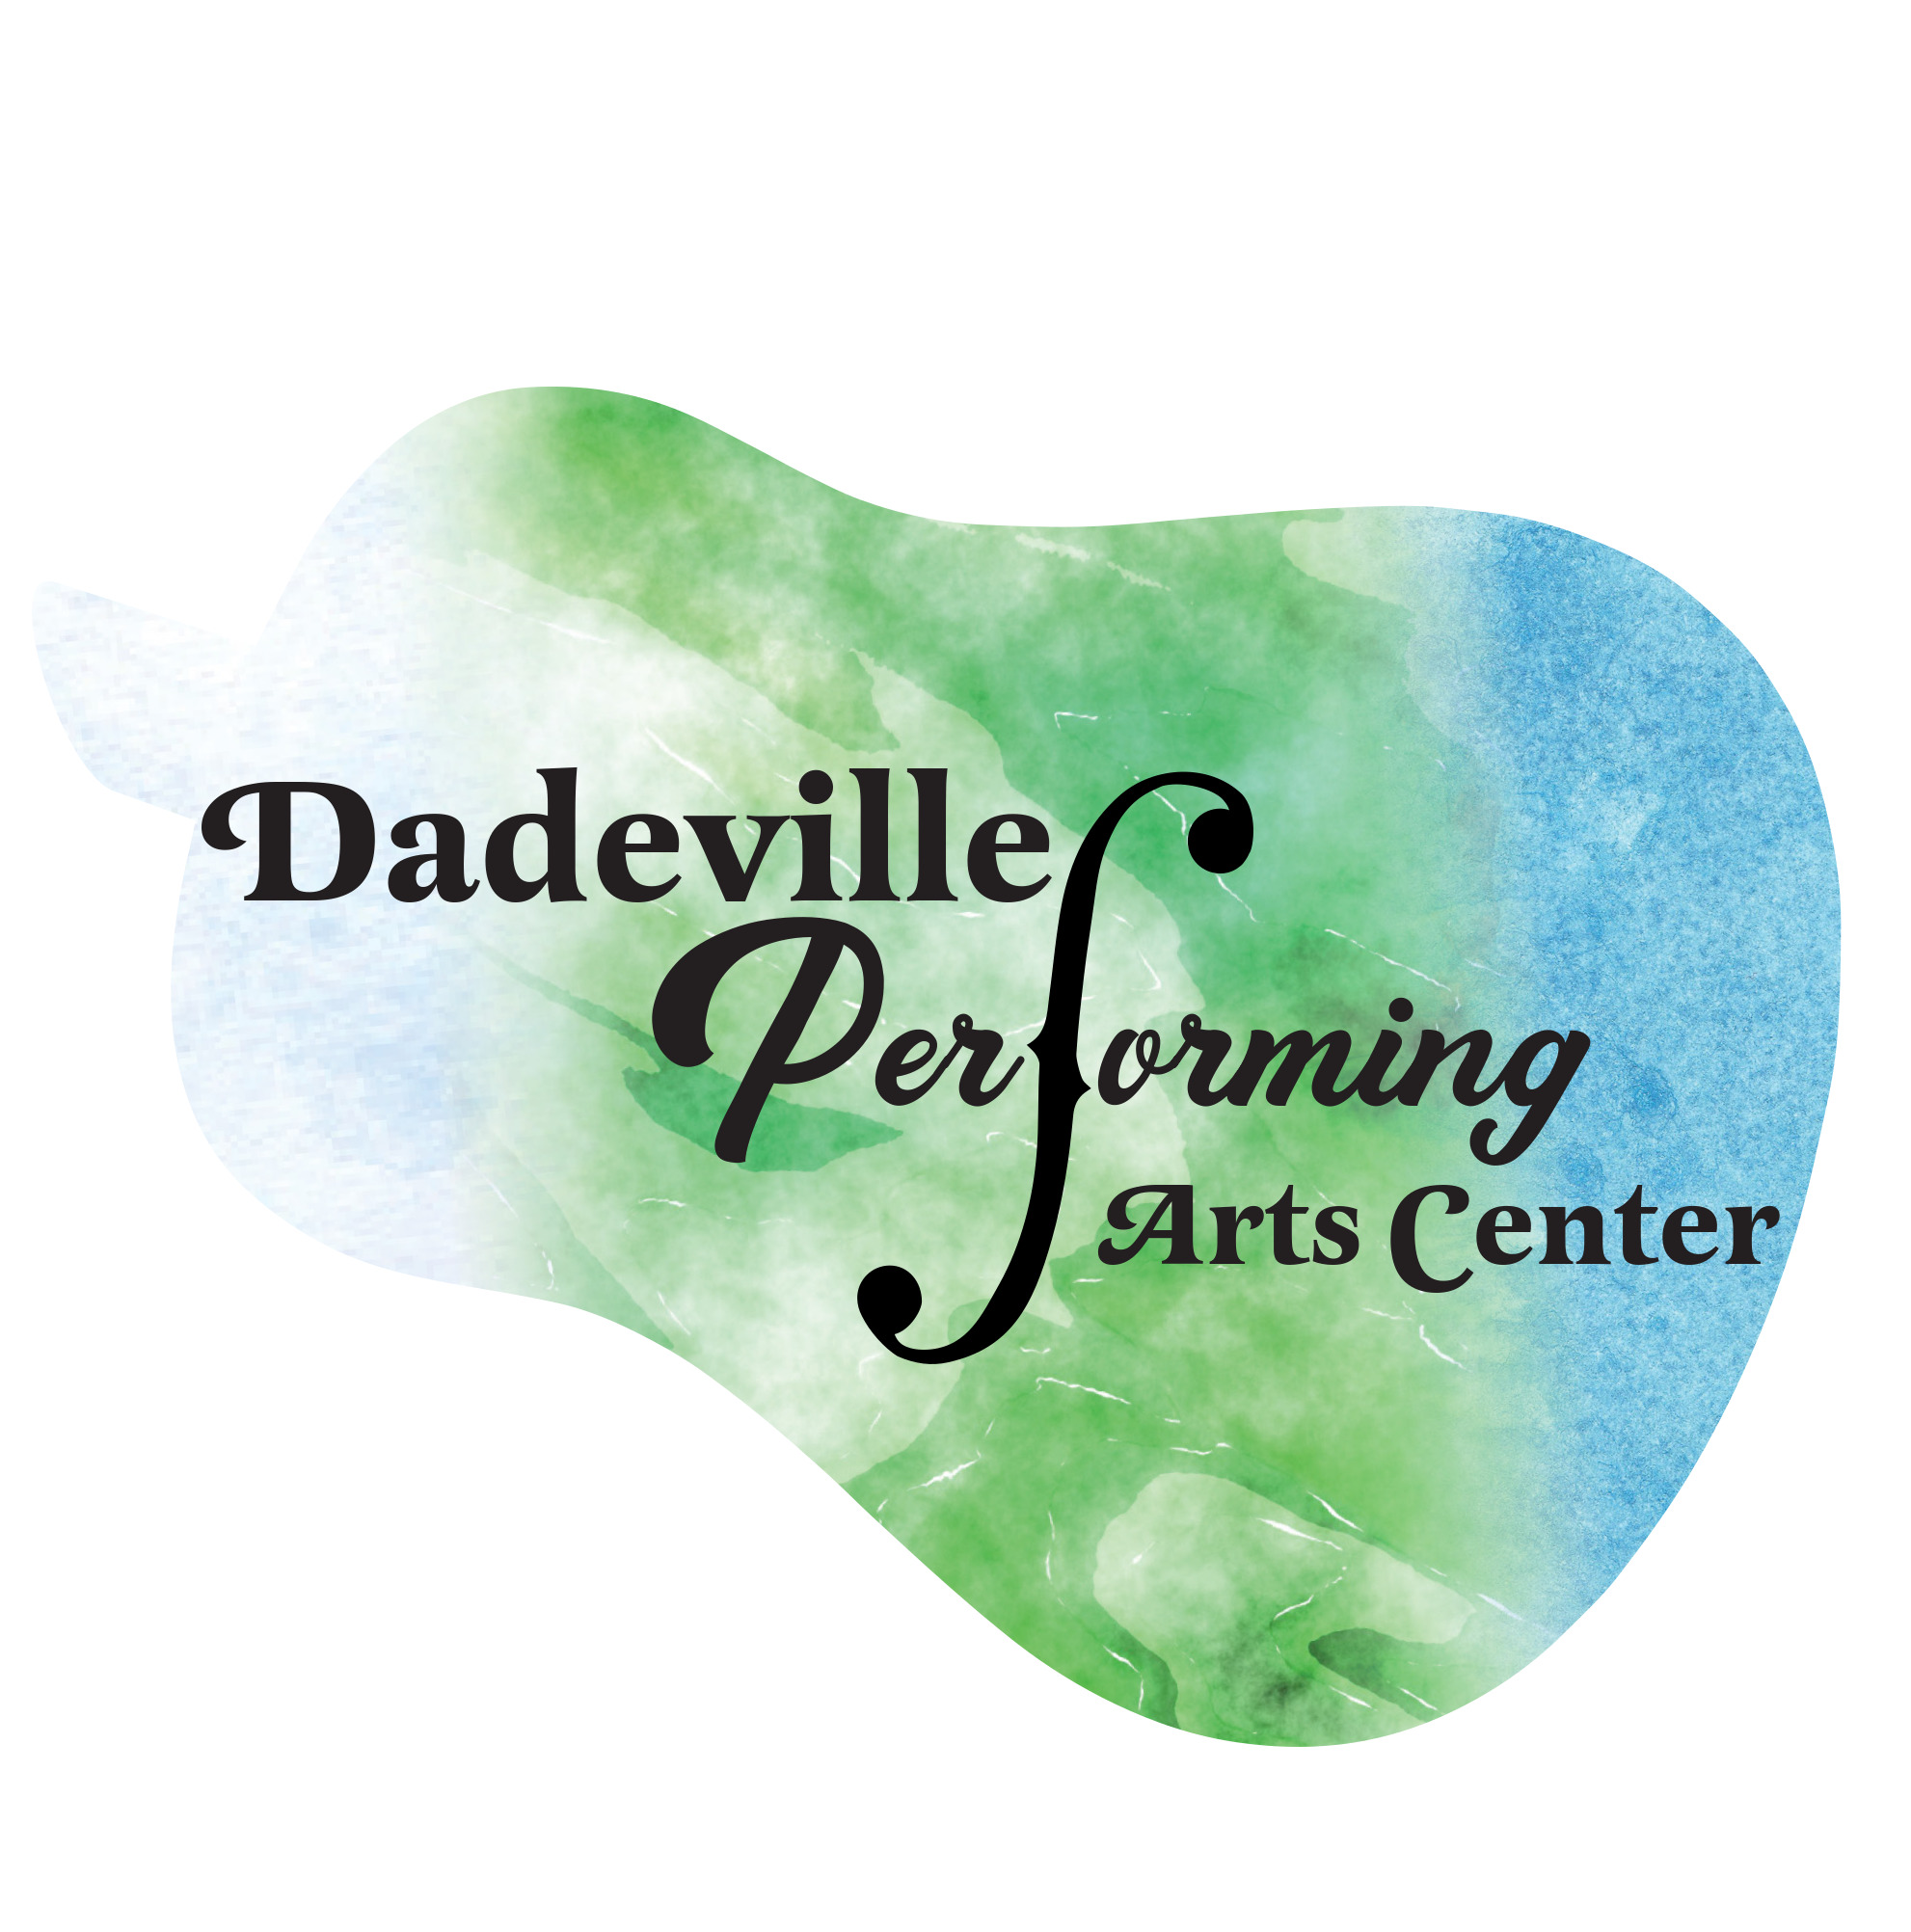 Dadeville Performing Arts Center